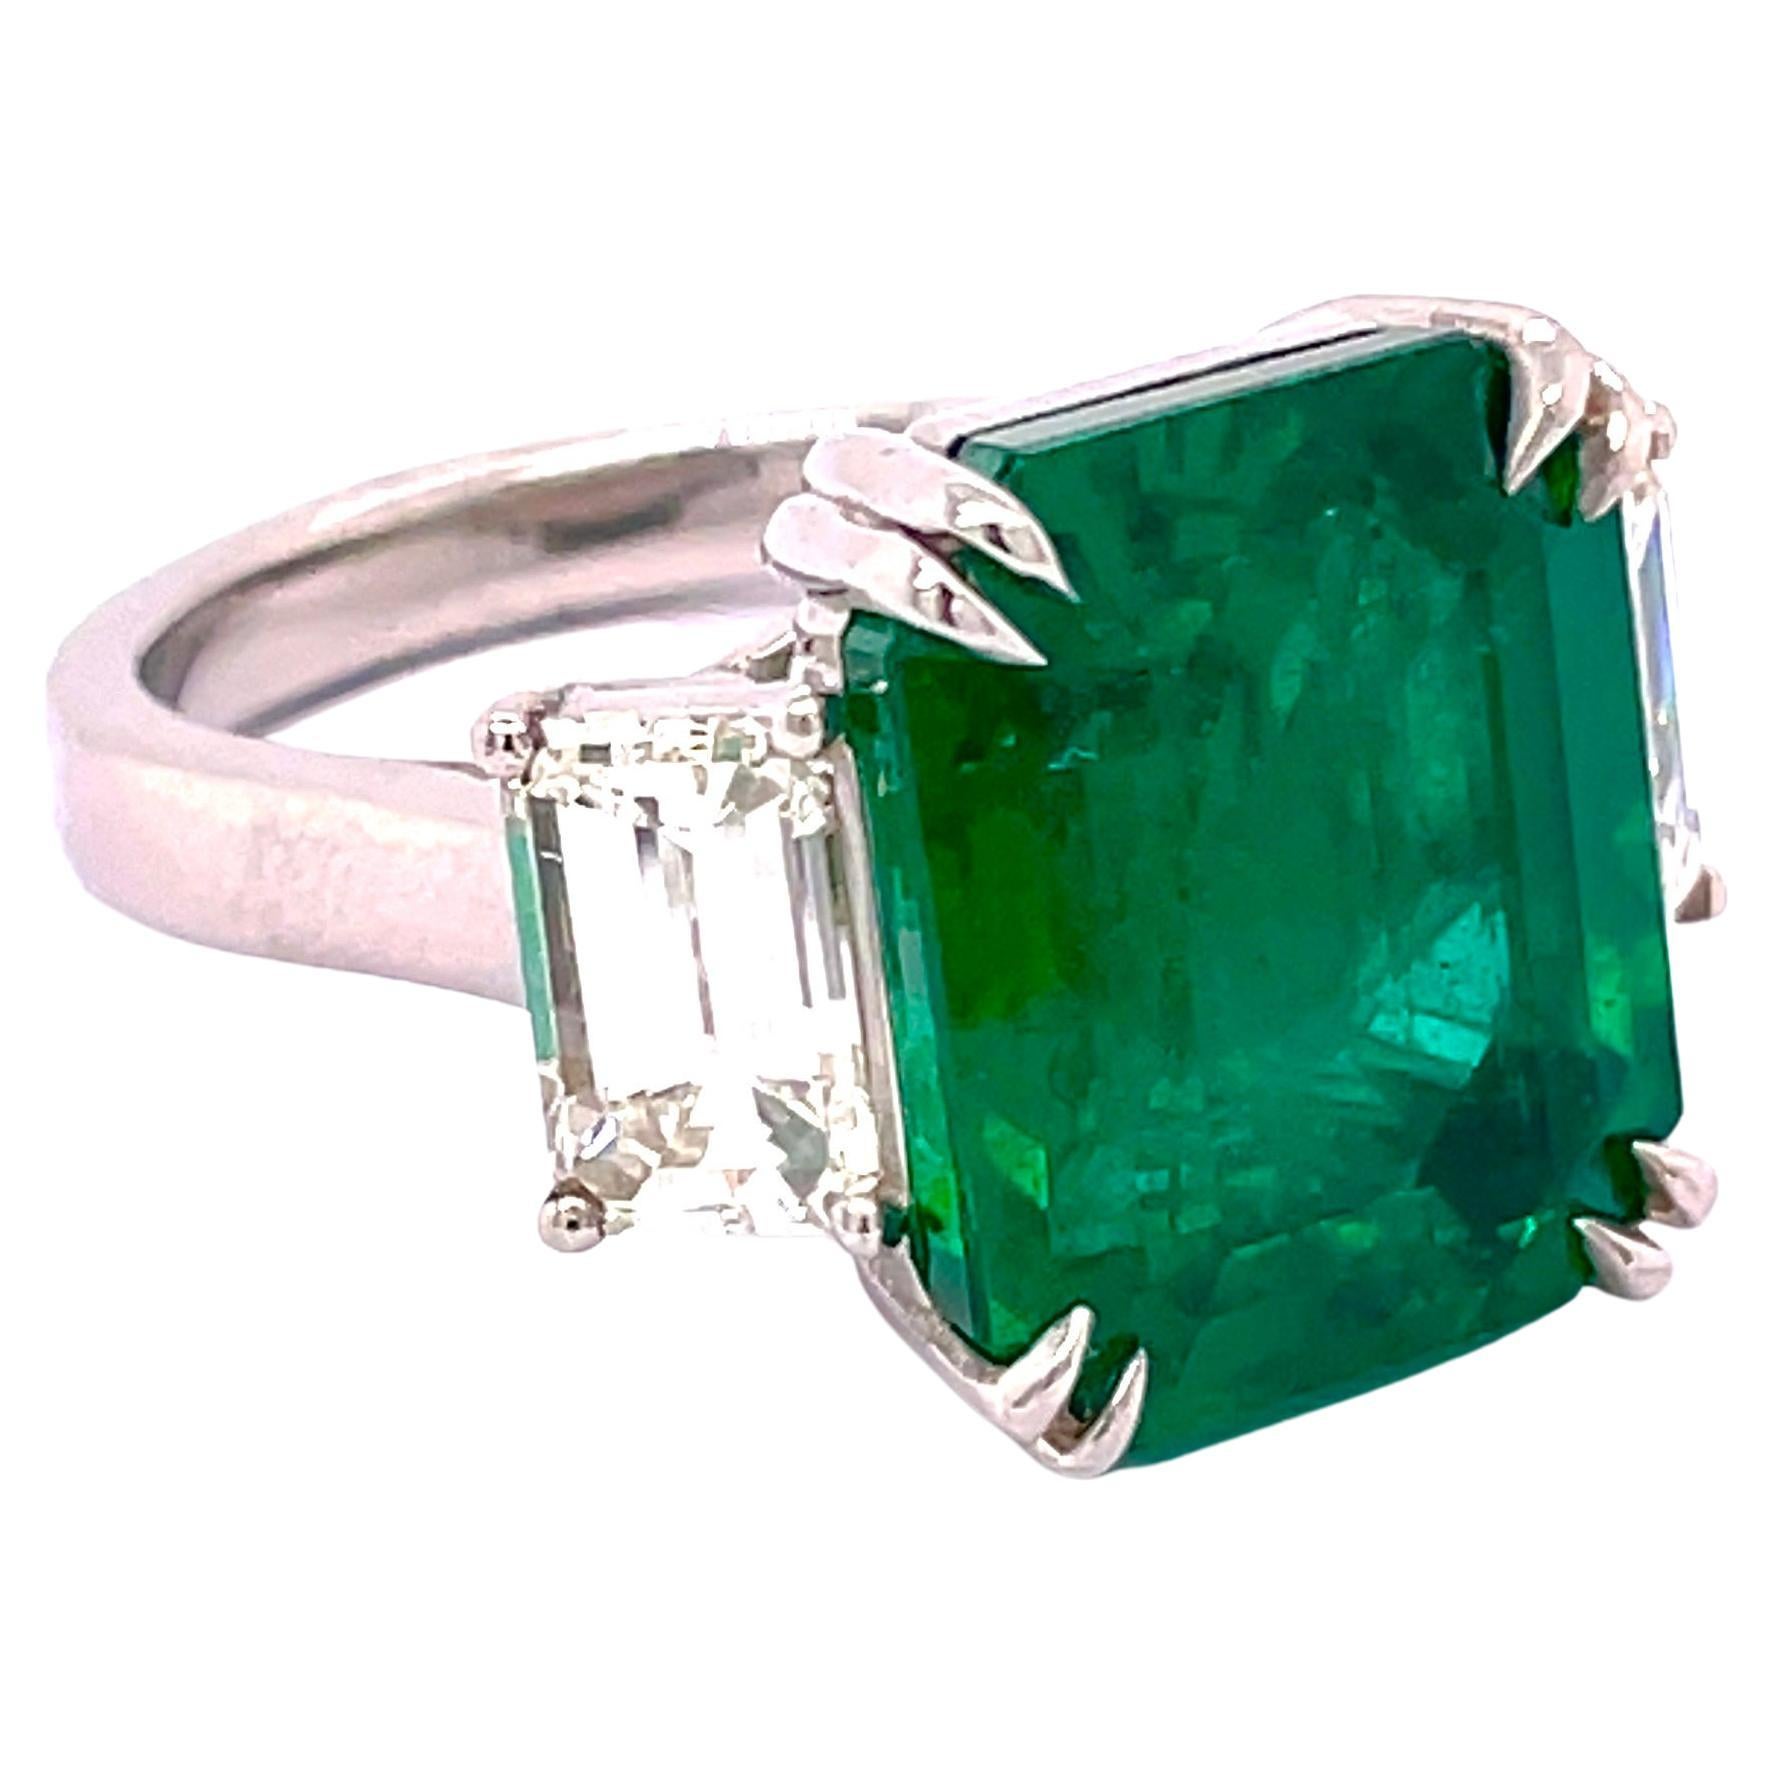 Spectacular GIA Certified 9.32 Carat Natural Emerald Radiant Cut 3 Stone Ring 

Setting:
Platinum

Center Stone:
Natural 9.32ct Emerald Radiant Cut 
 

Side Stones: Natural Emerald Cut Diamonds
Color: G-H
Clarity: VS
Cut: Excellent
The total